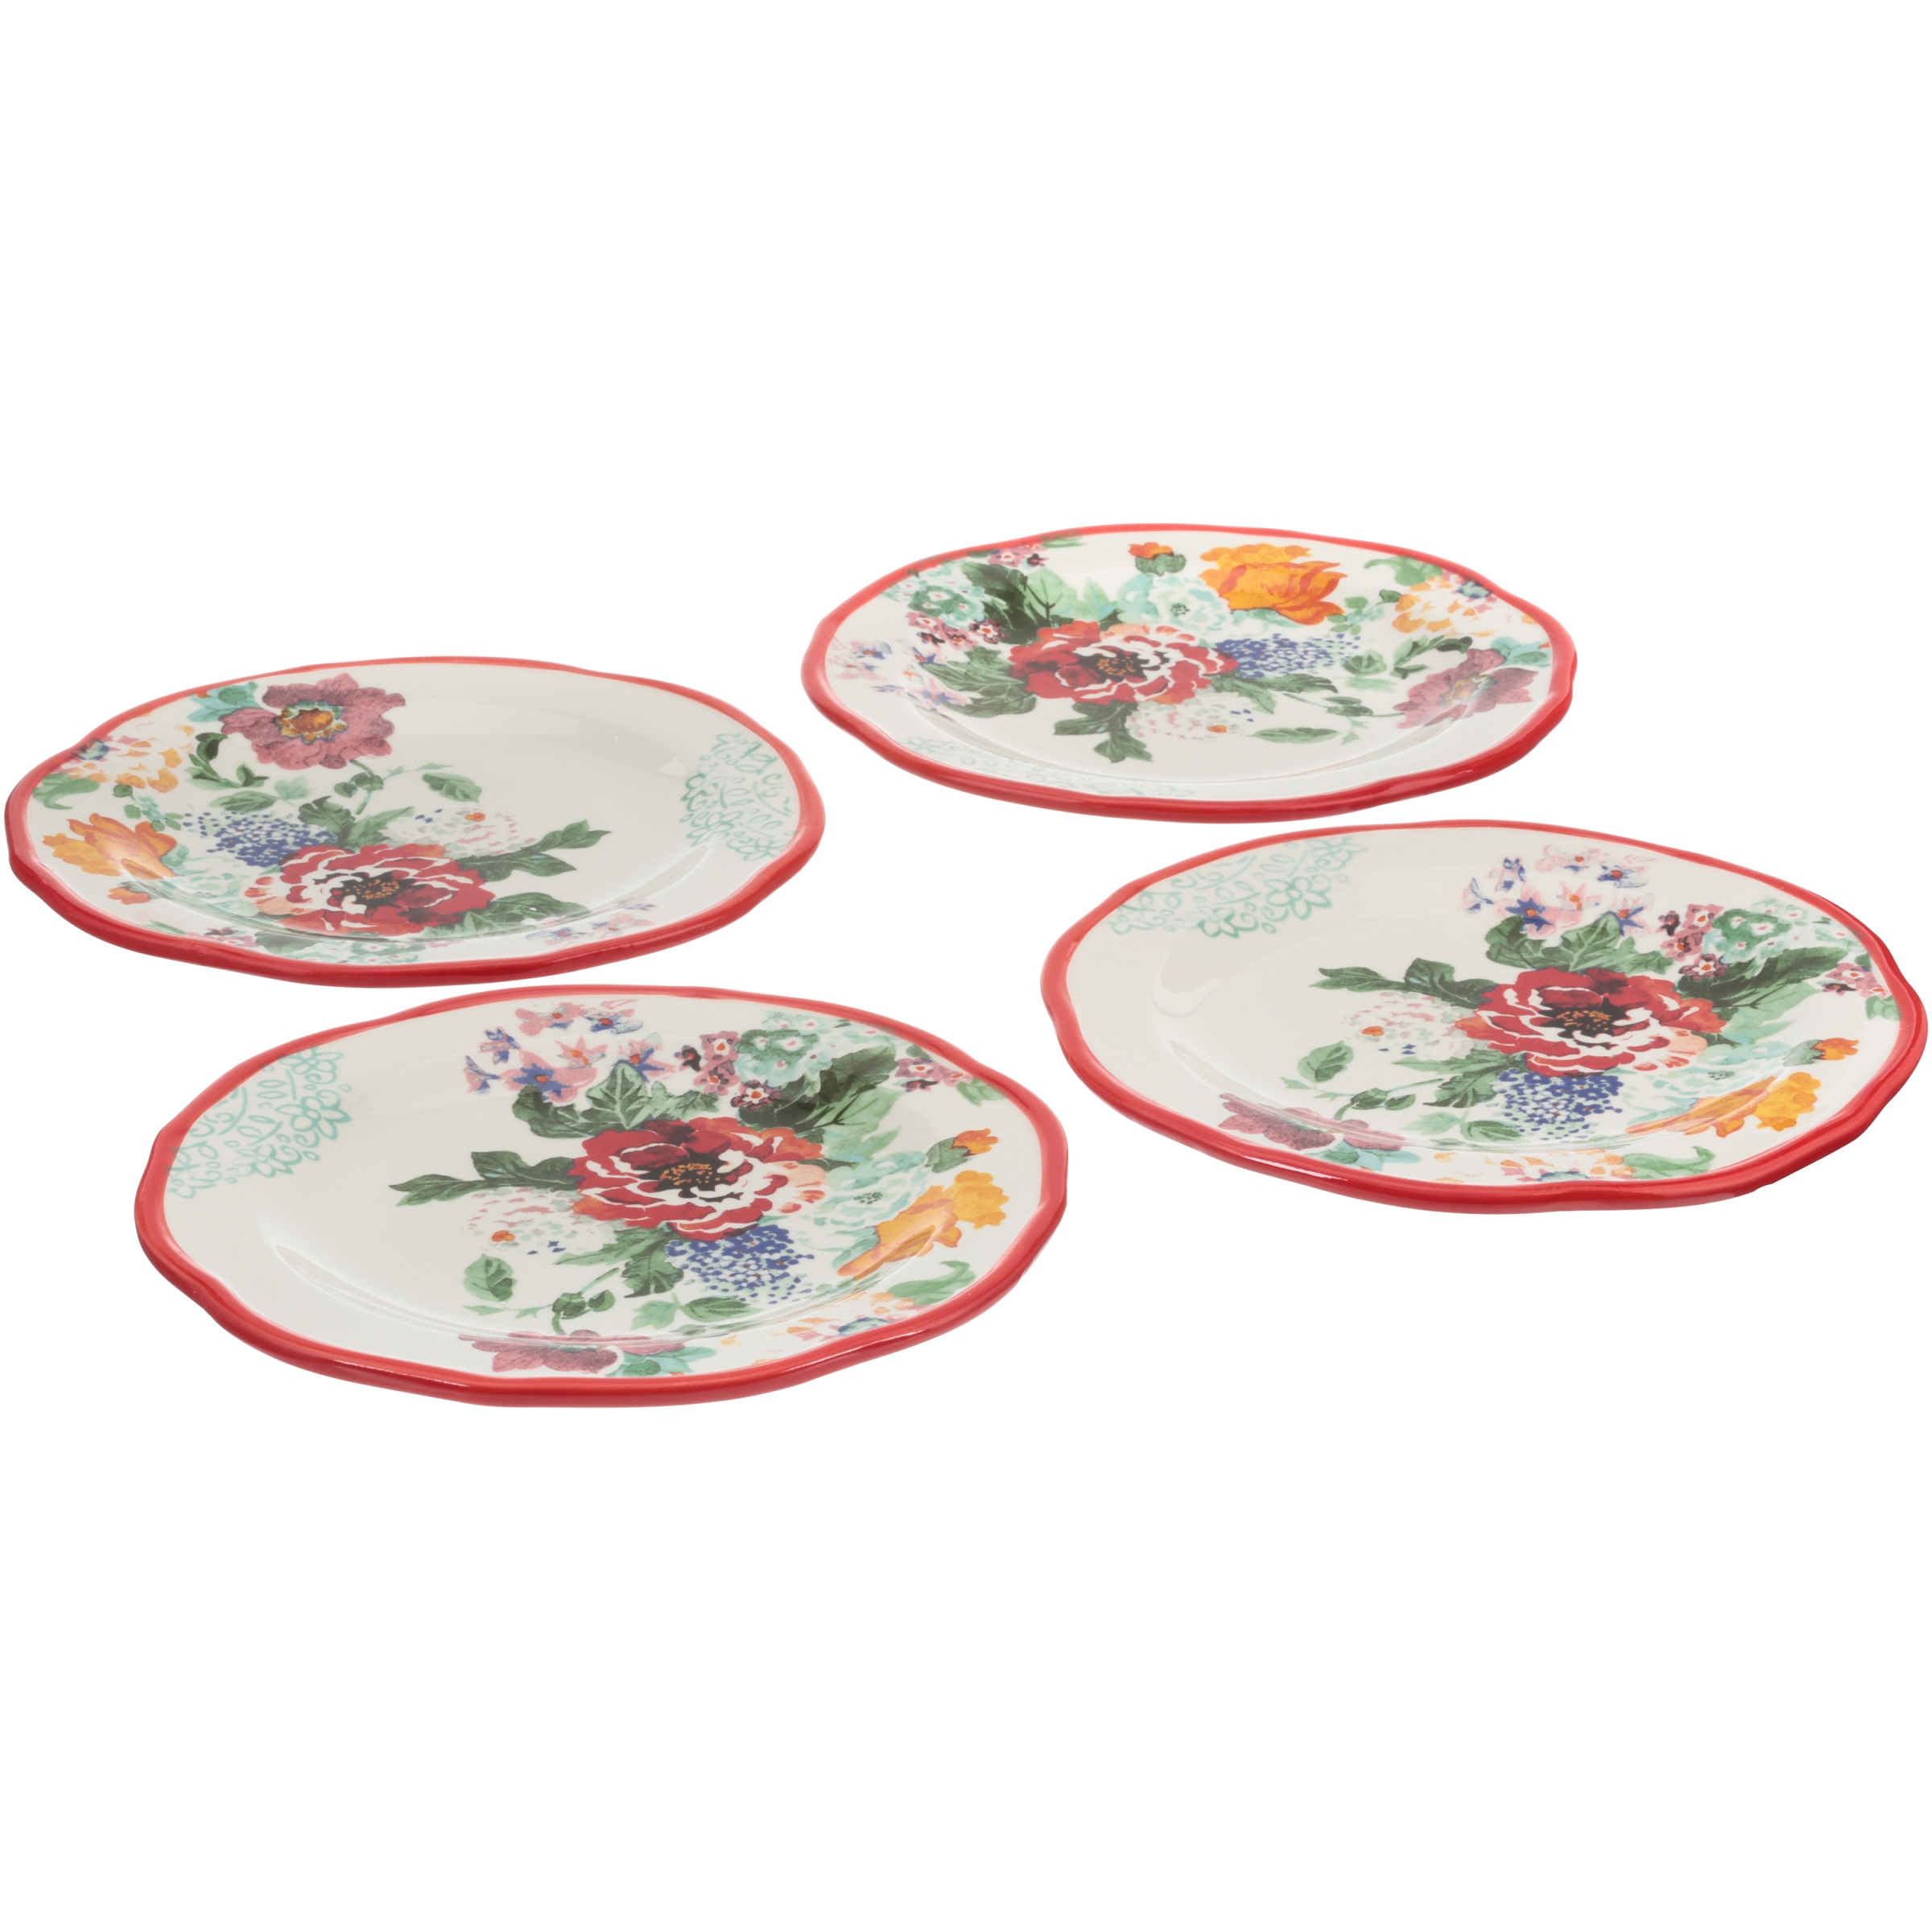 The Pioneer Woman Country Garden 4-Piece Salad Plate Set - image 2 of 4